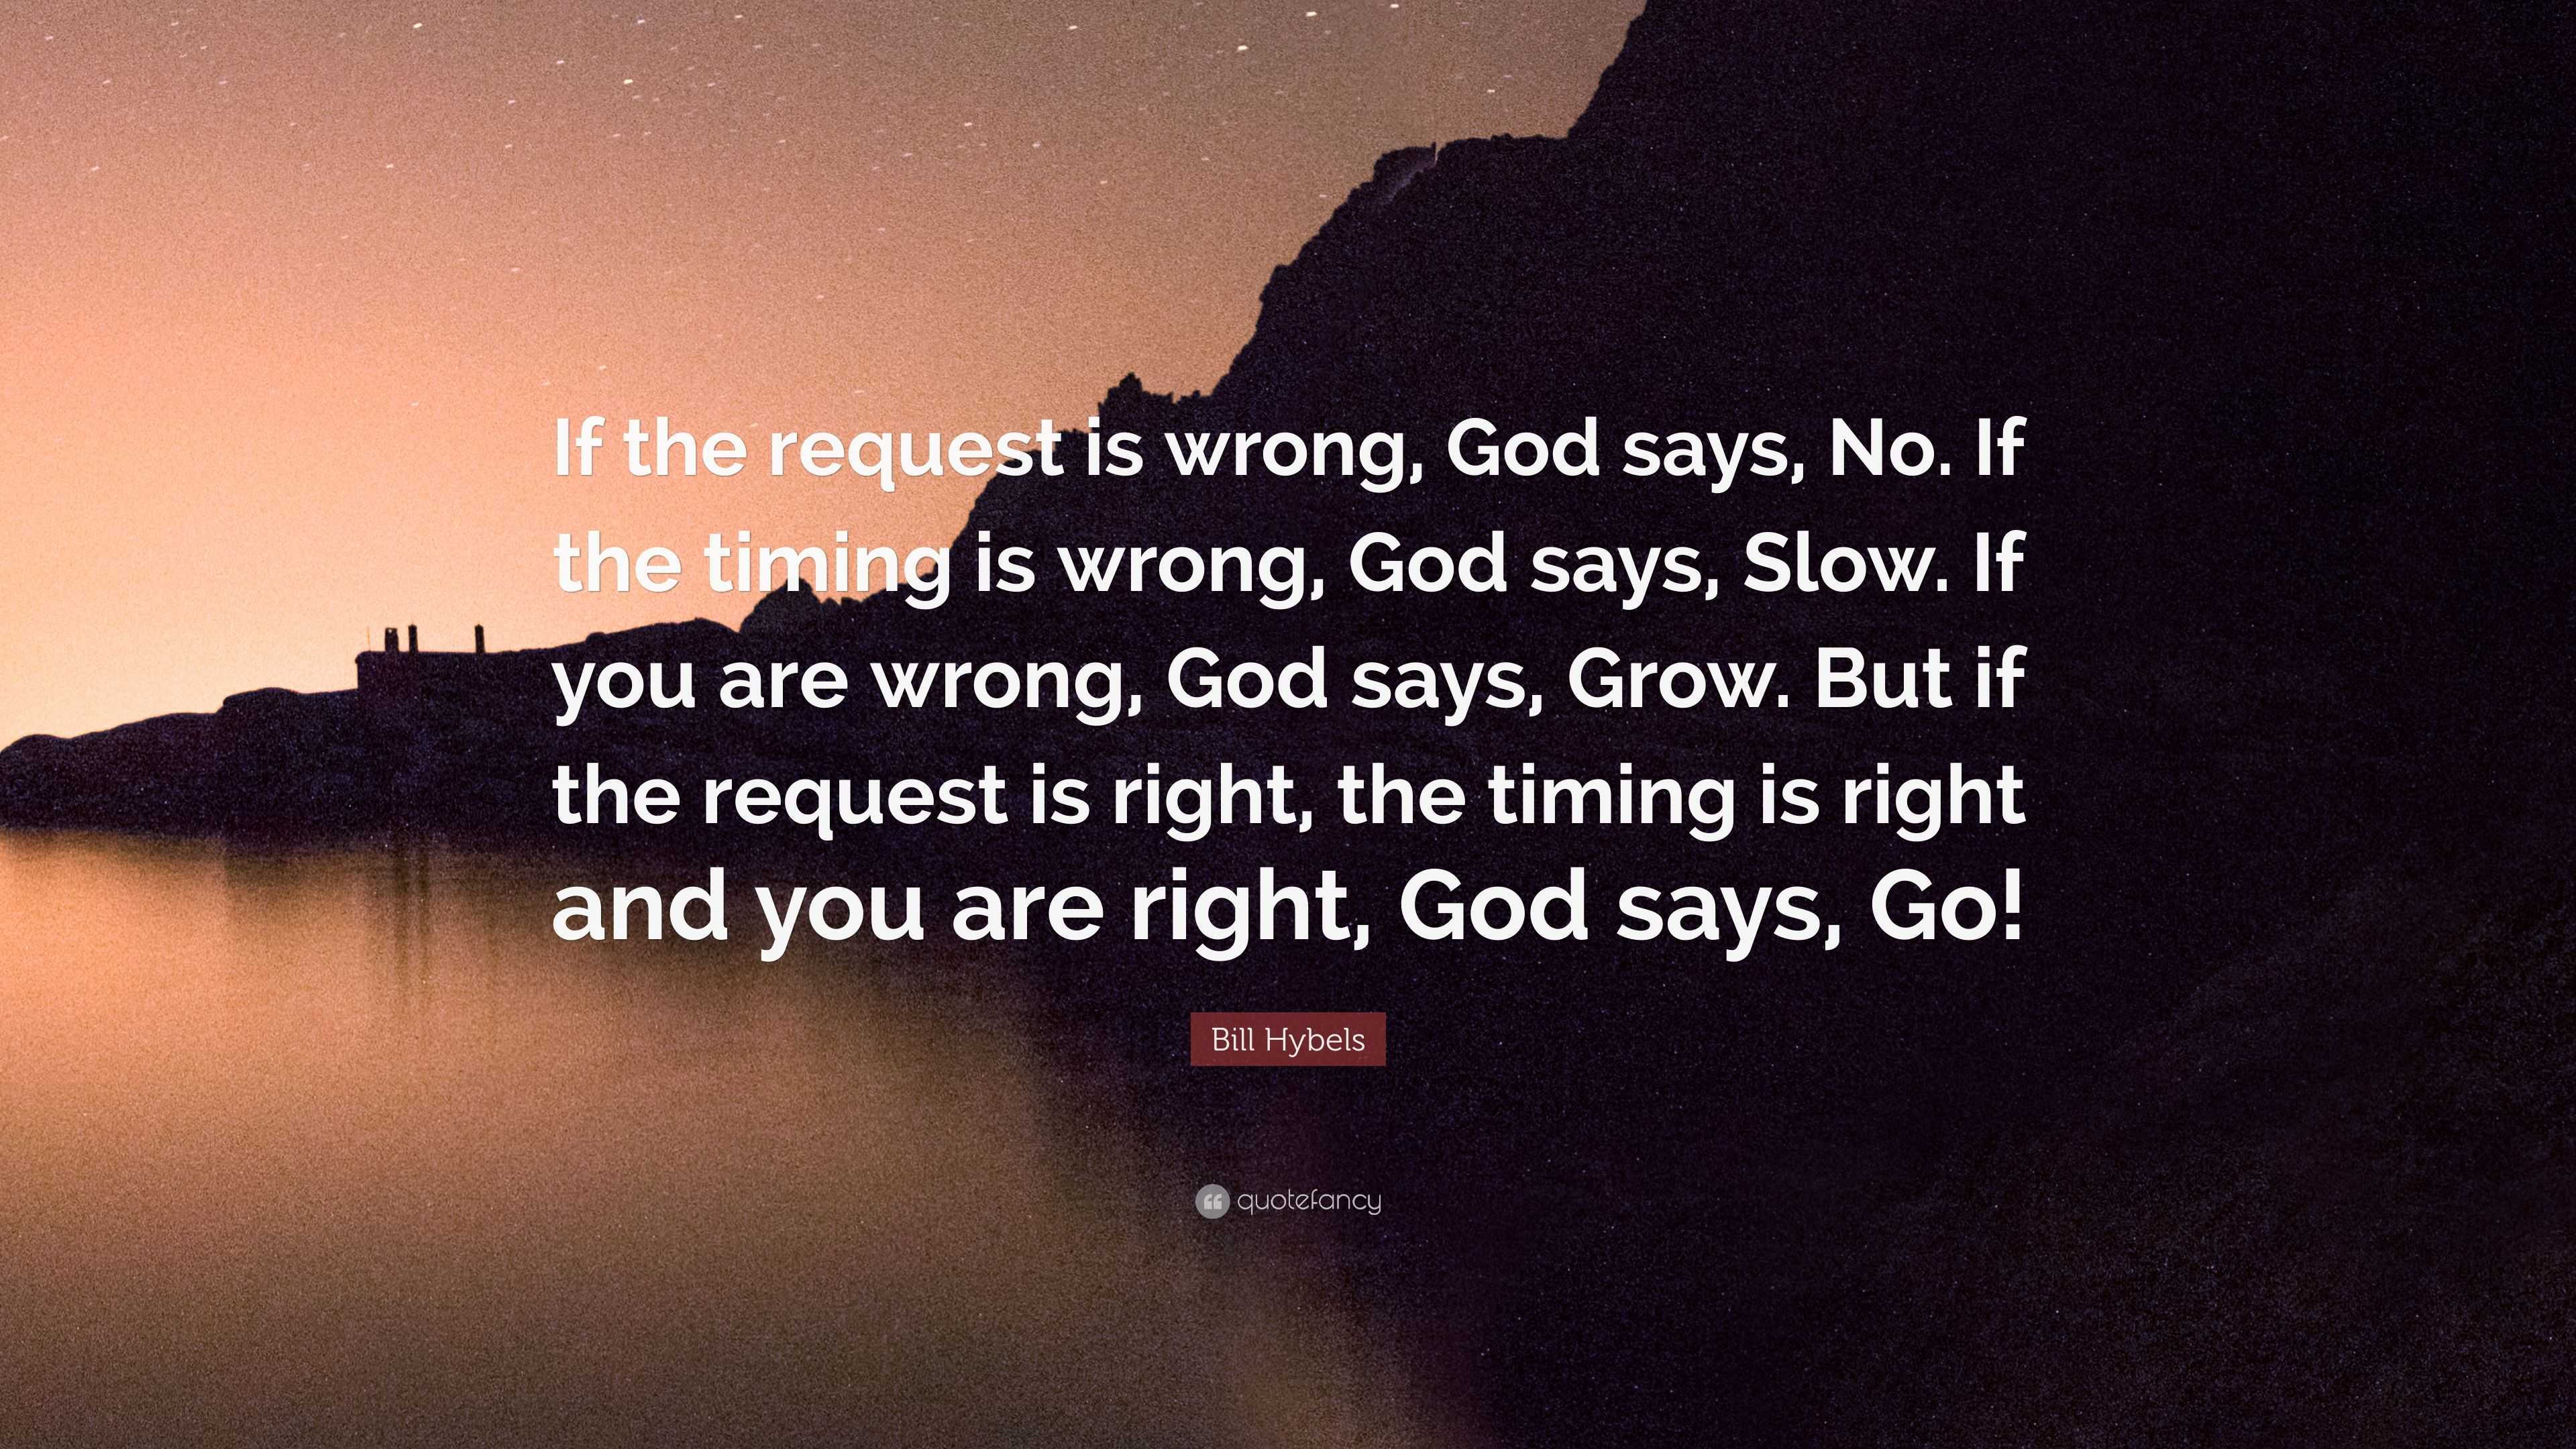 Bill Hybels Quote “If the request is wrong God says No